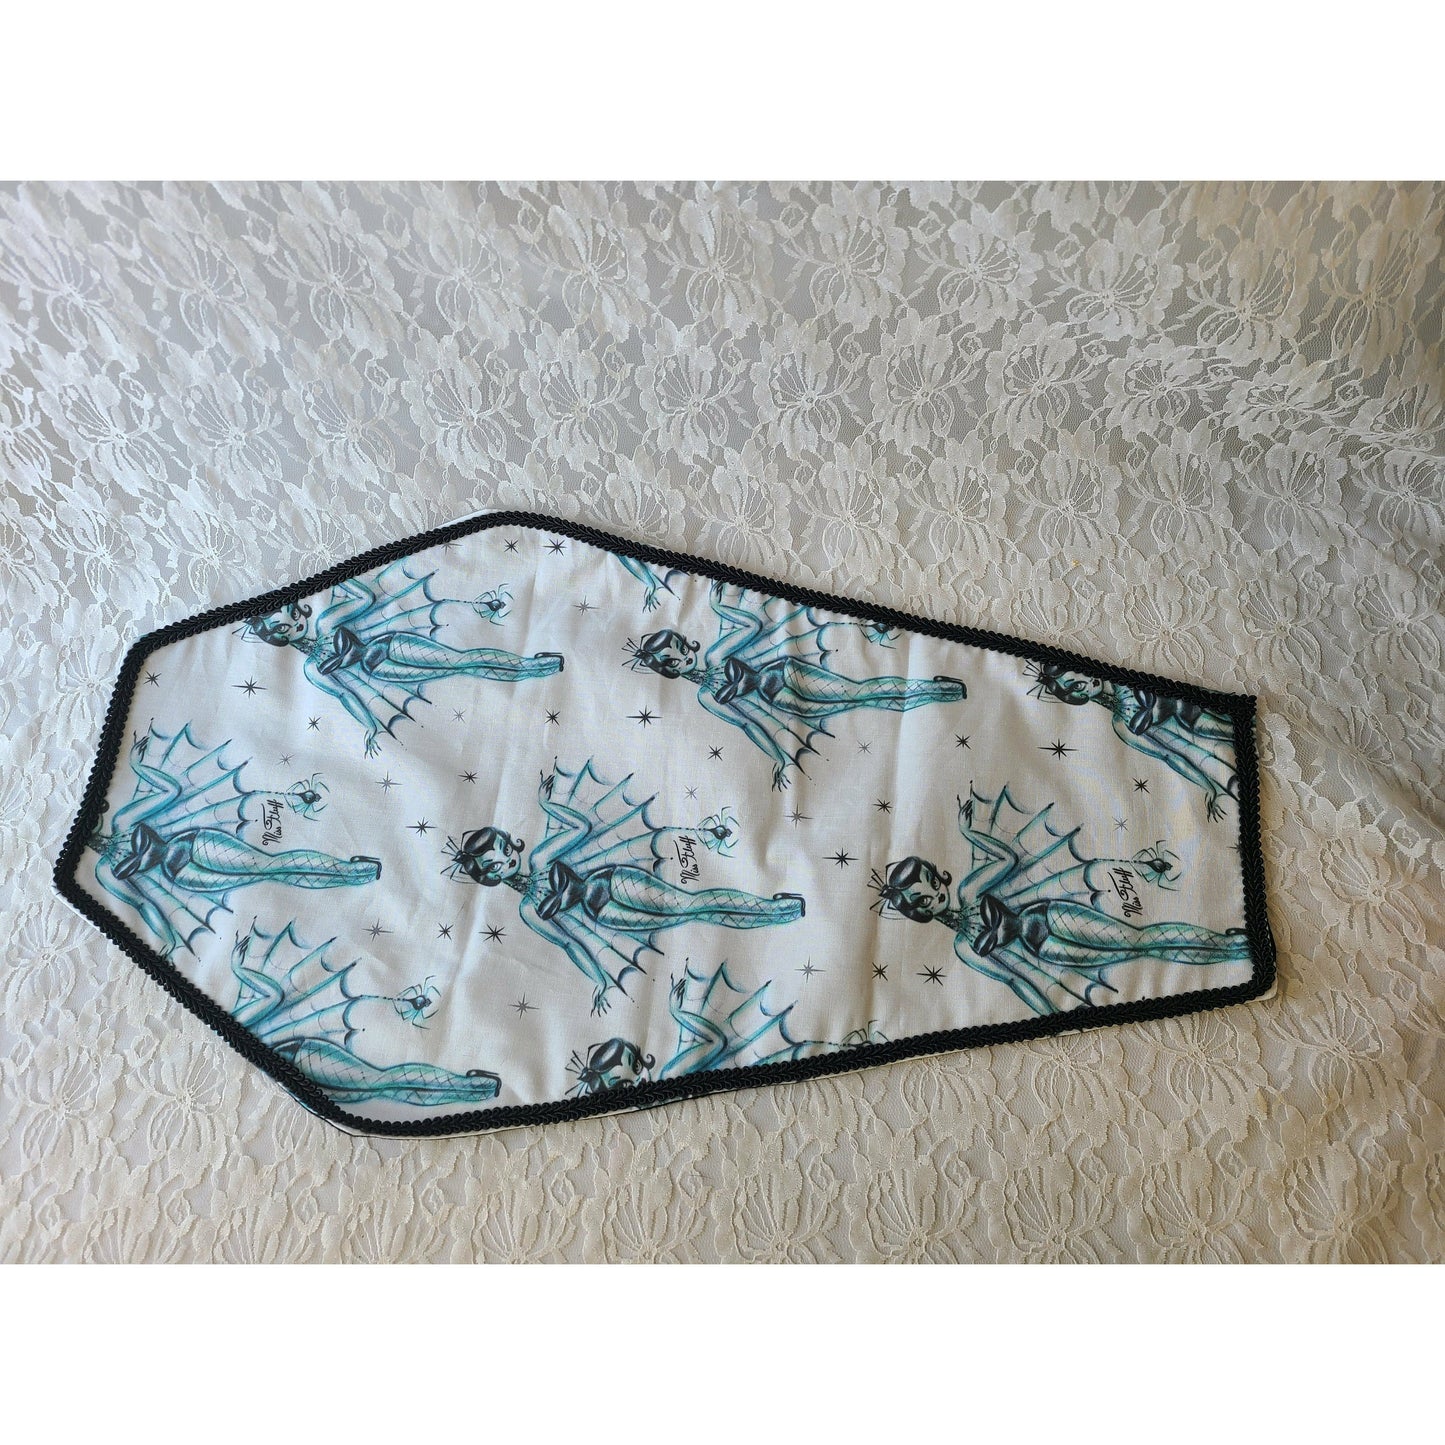 Handmade Table Runner ~ COFFIN Shaped Halloween Table Runner w/ Pin-Up Girl Bats ~ White and Teal ~ Unique ~ Quilt Style ~ OOAK Fall Décor